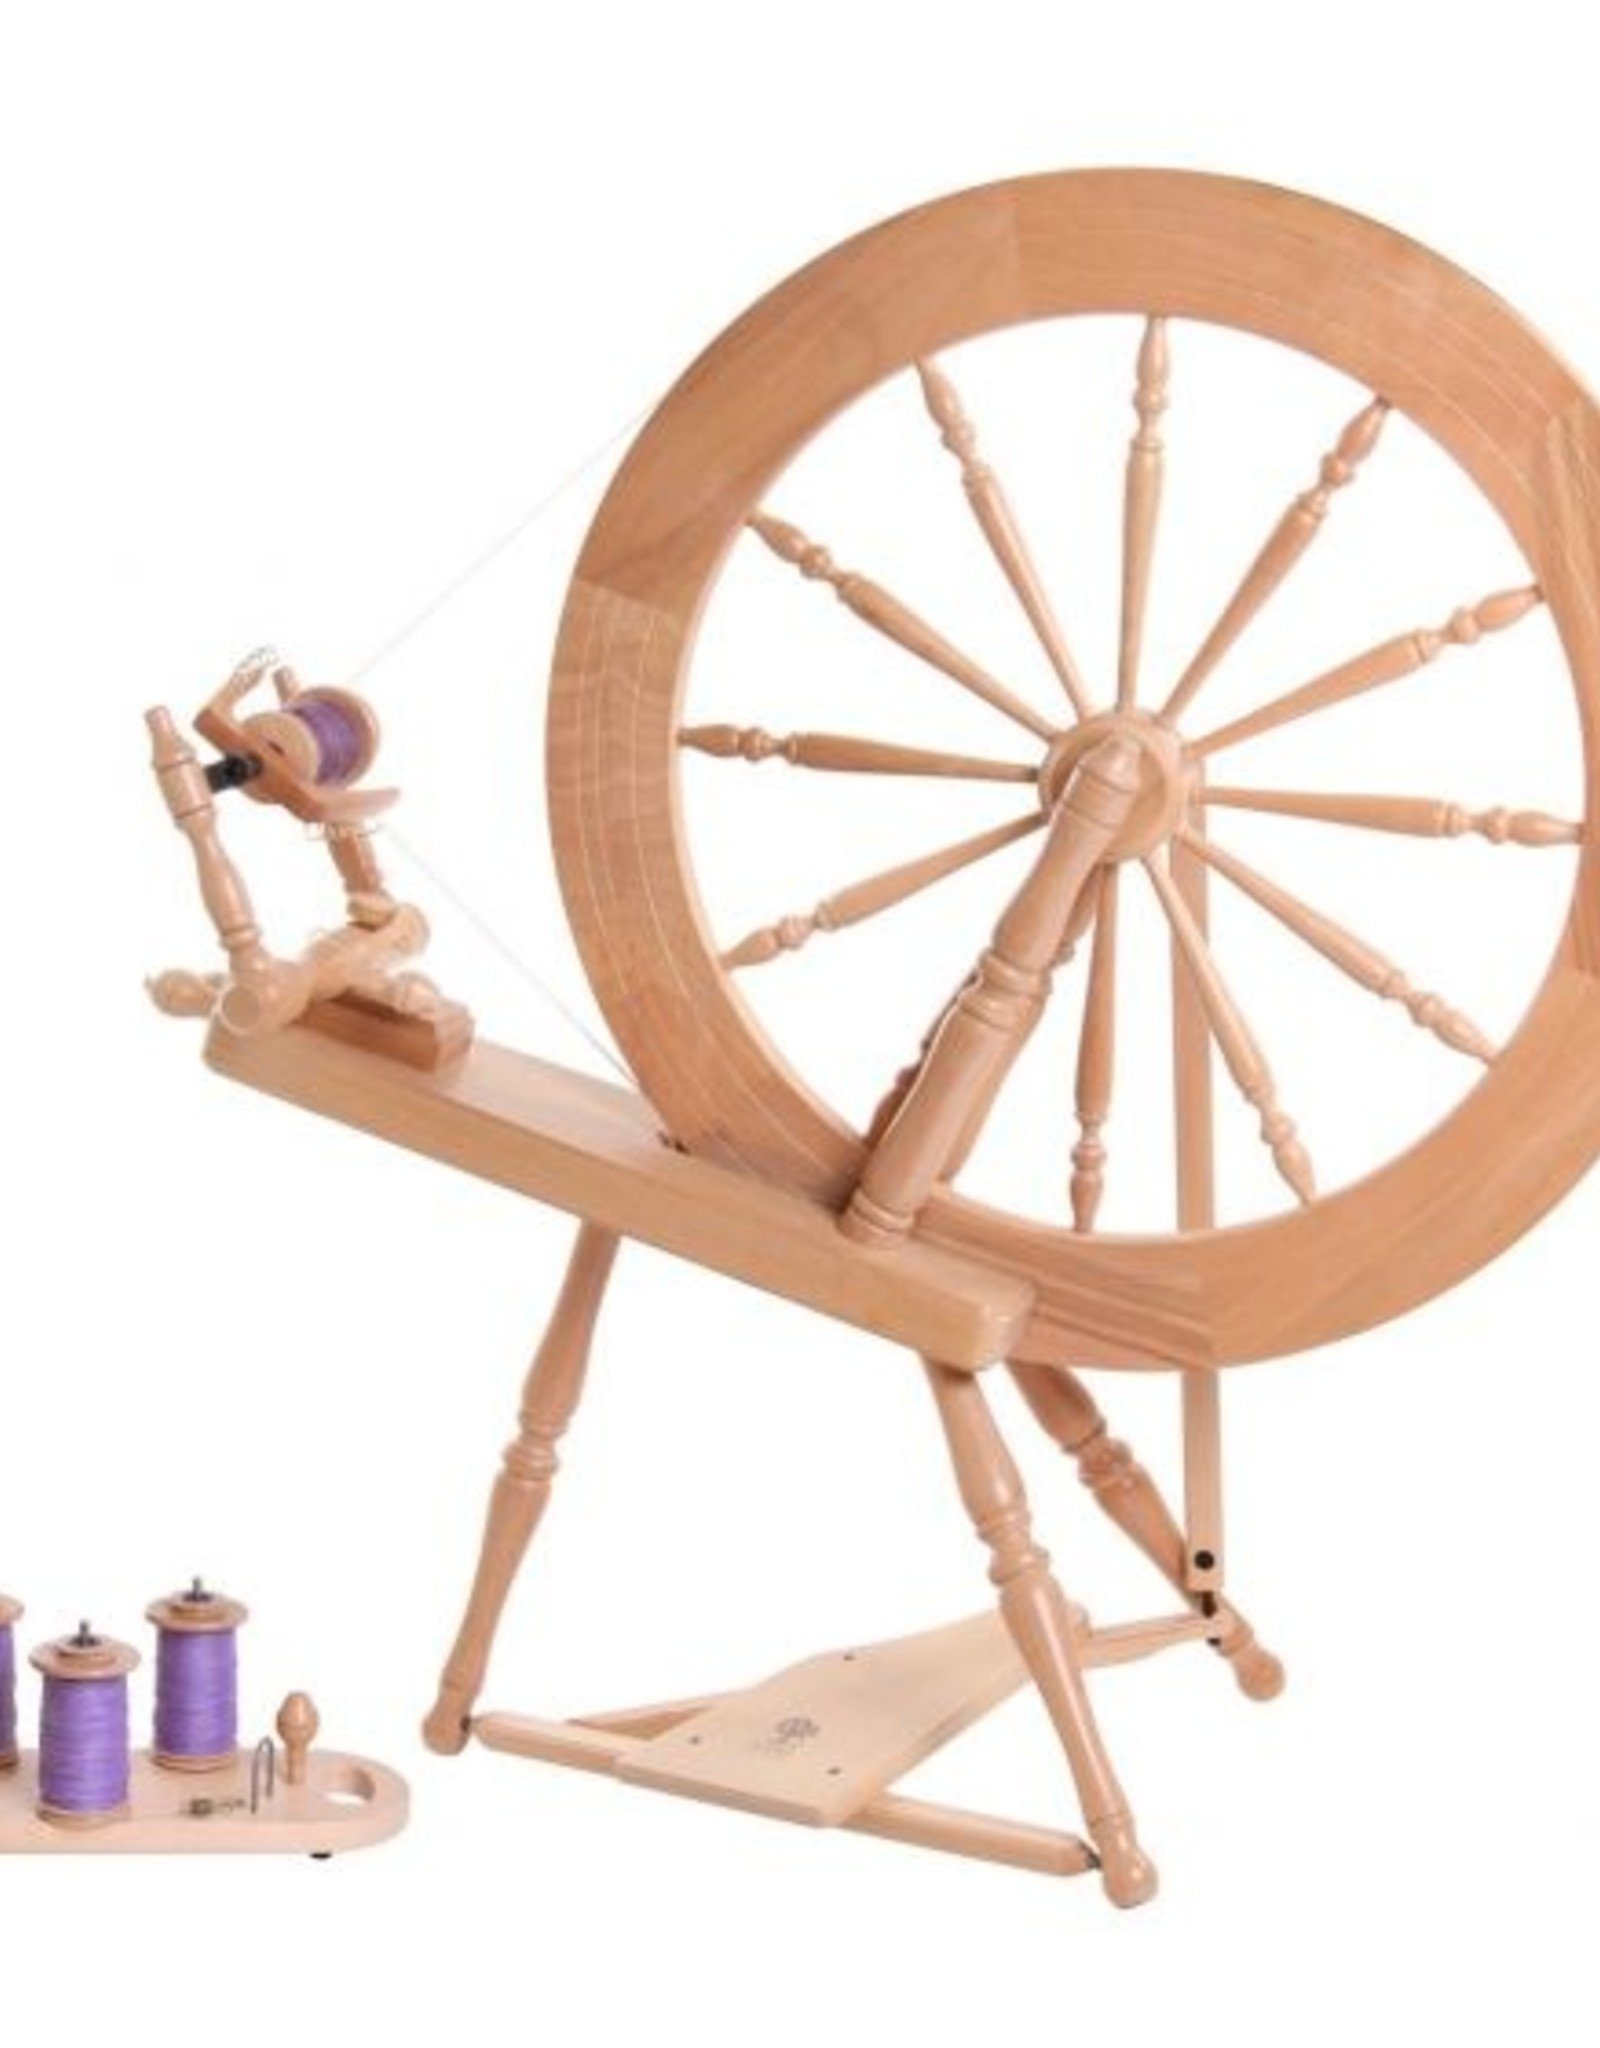 Ashford Elizabeth 30" Limited Edition Spinning Wheel Single Treadle Double Drive Lacquered